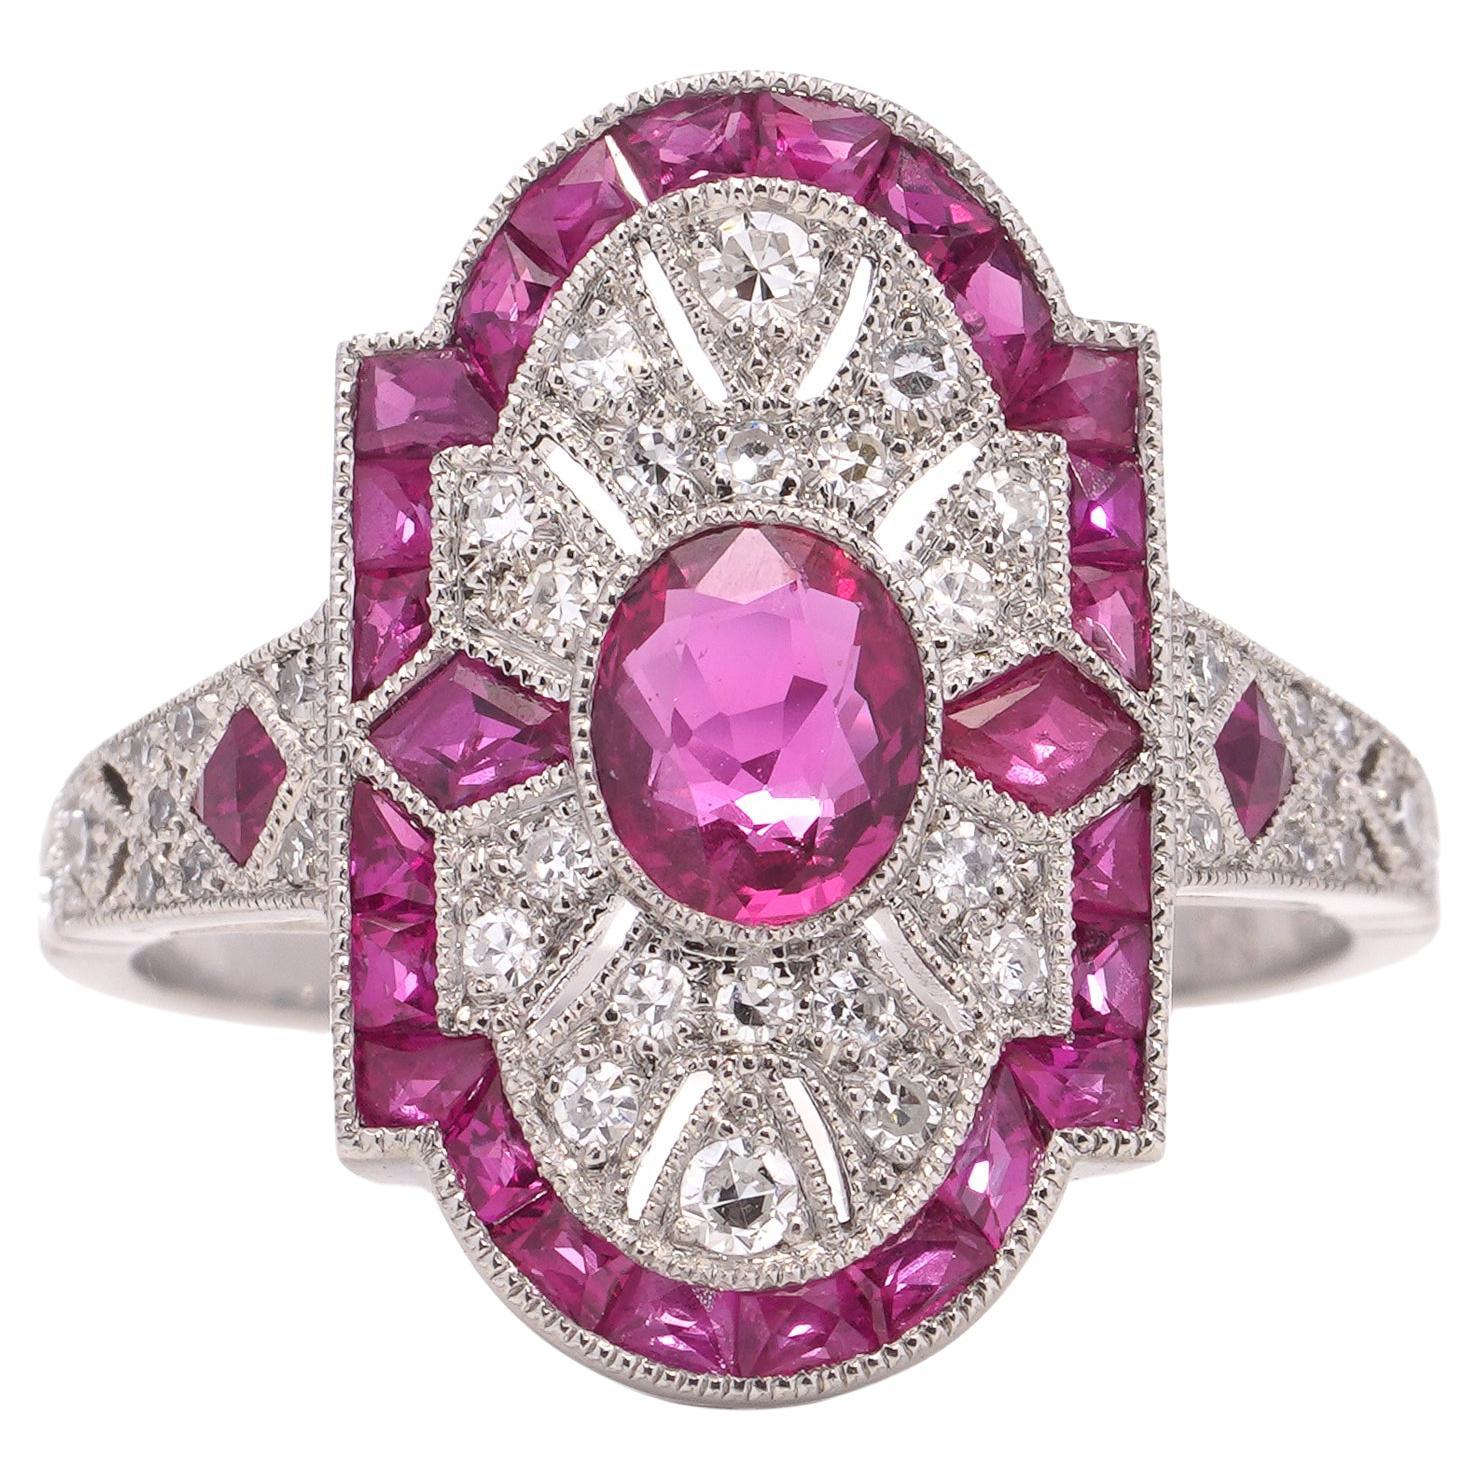 JoAq Platinum Art Deco-inspired ruby cluster ring with diamonds 